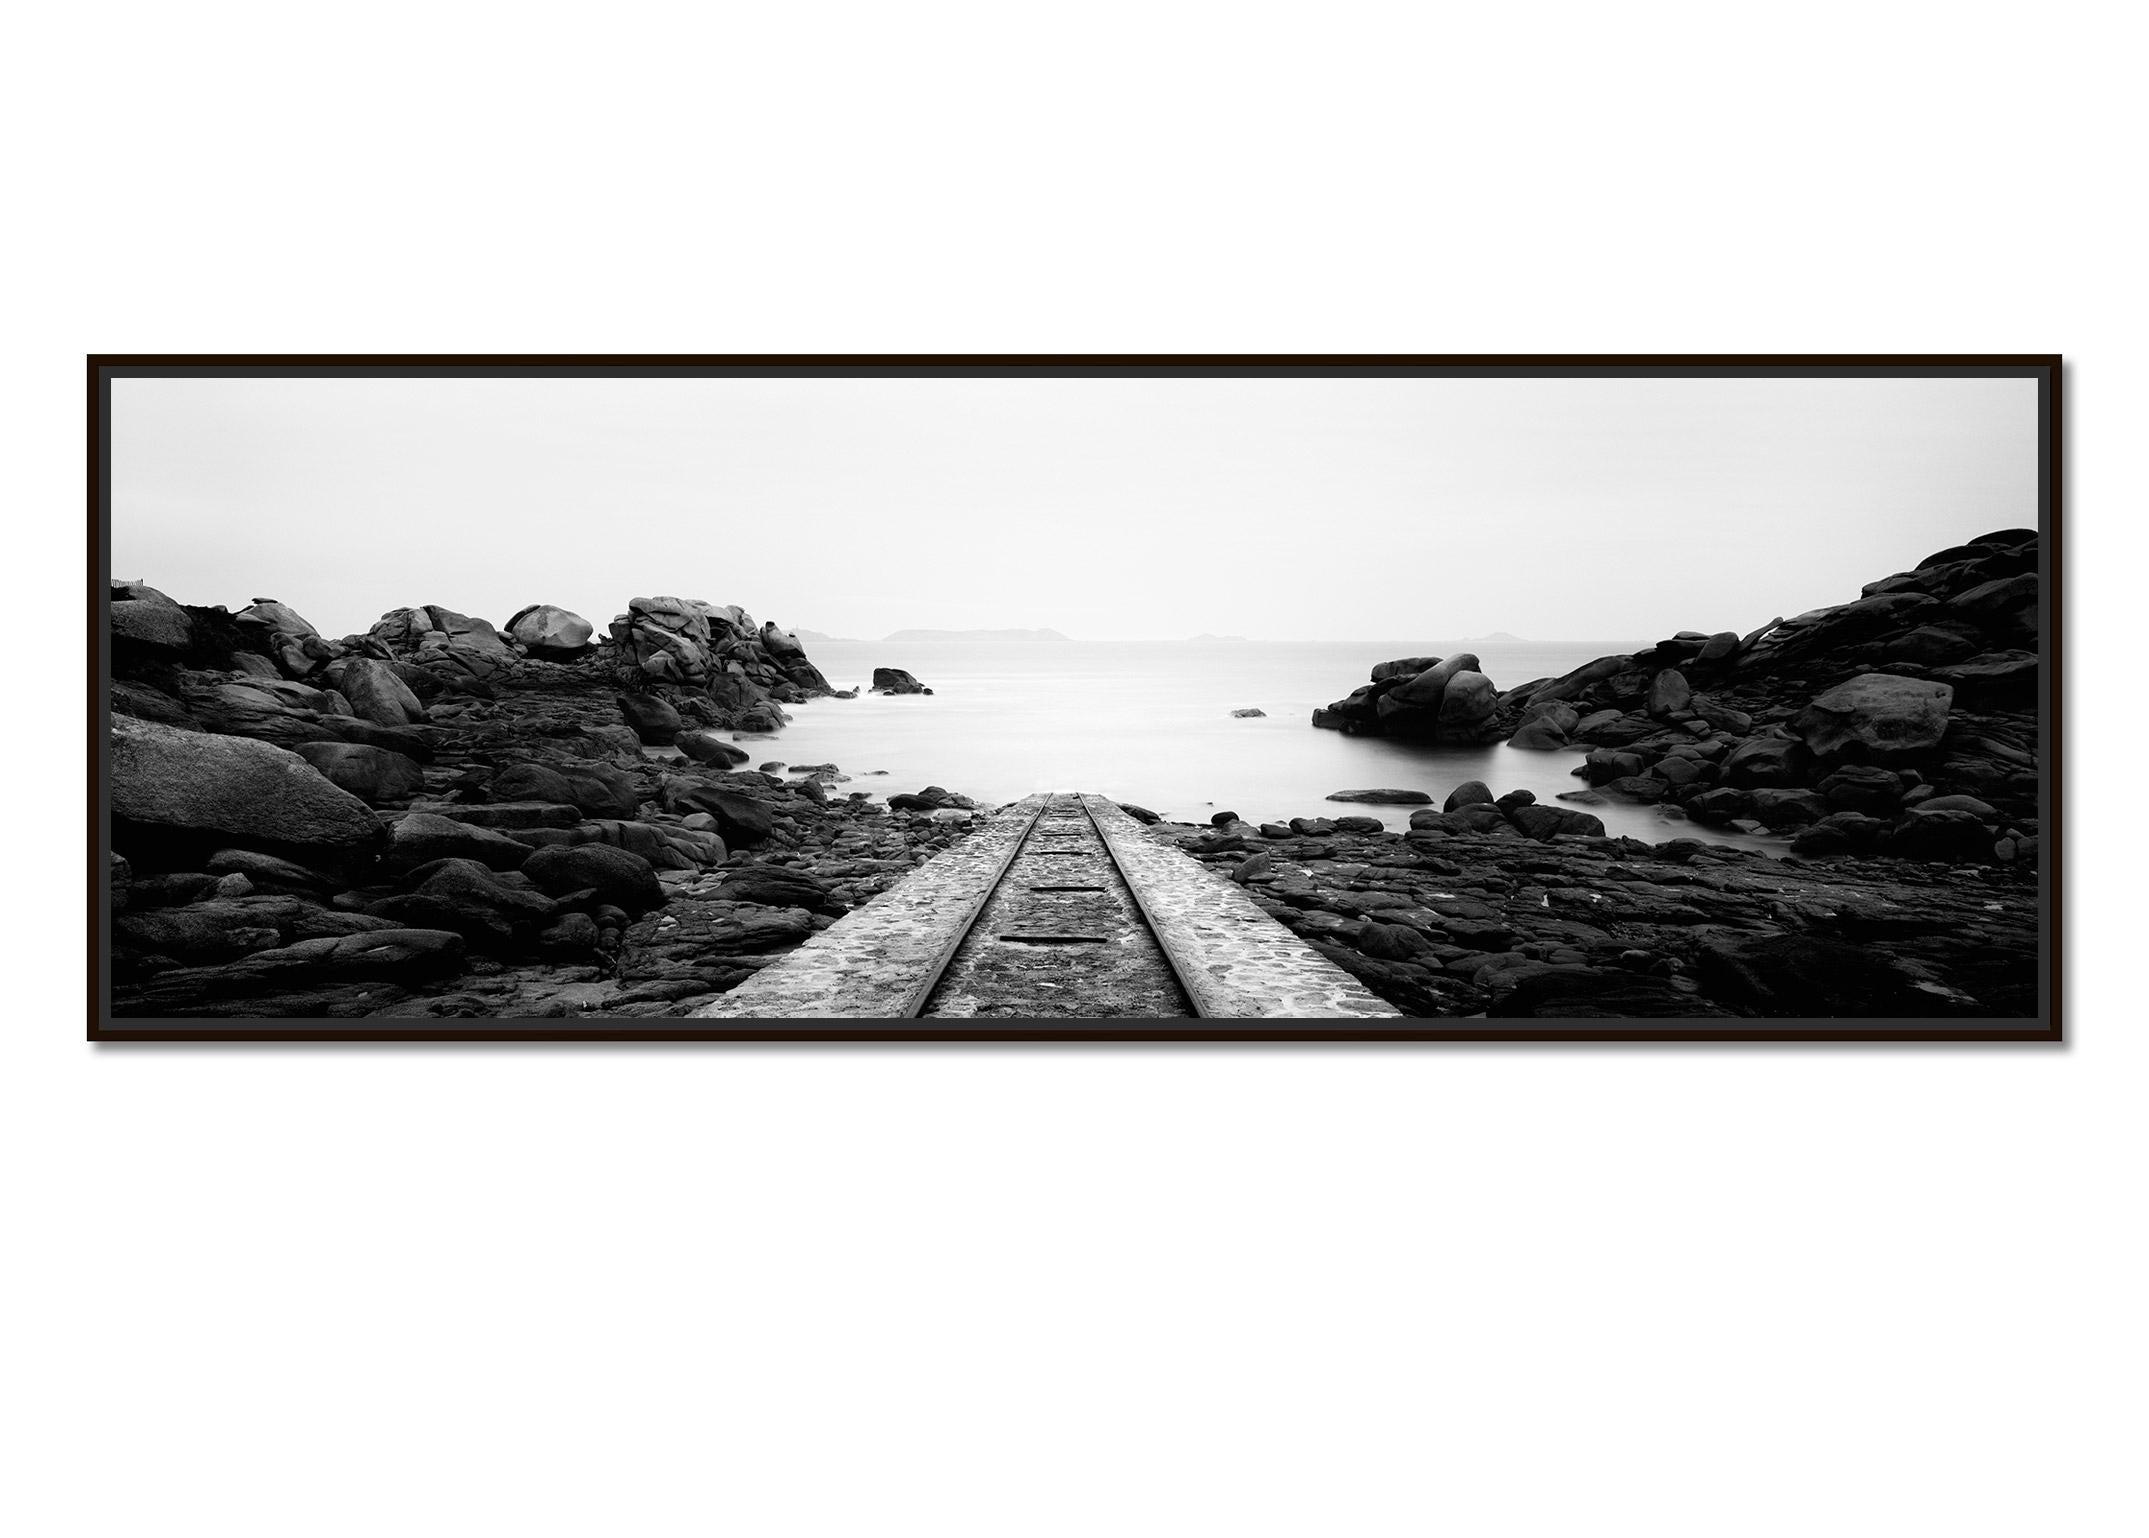 Into the Ocean France contemporary black white fine art landscape photography - Photograph by Gerald Berghammer